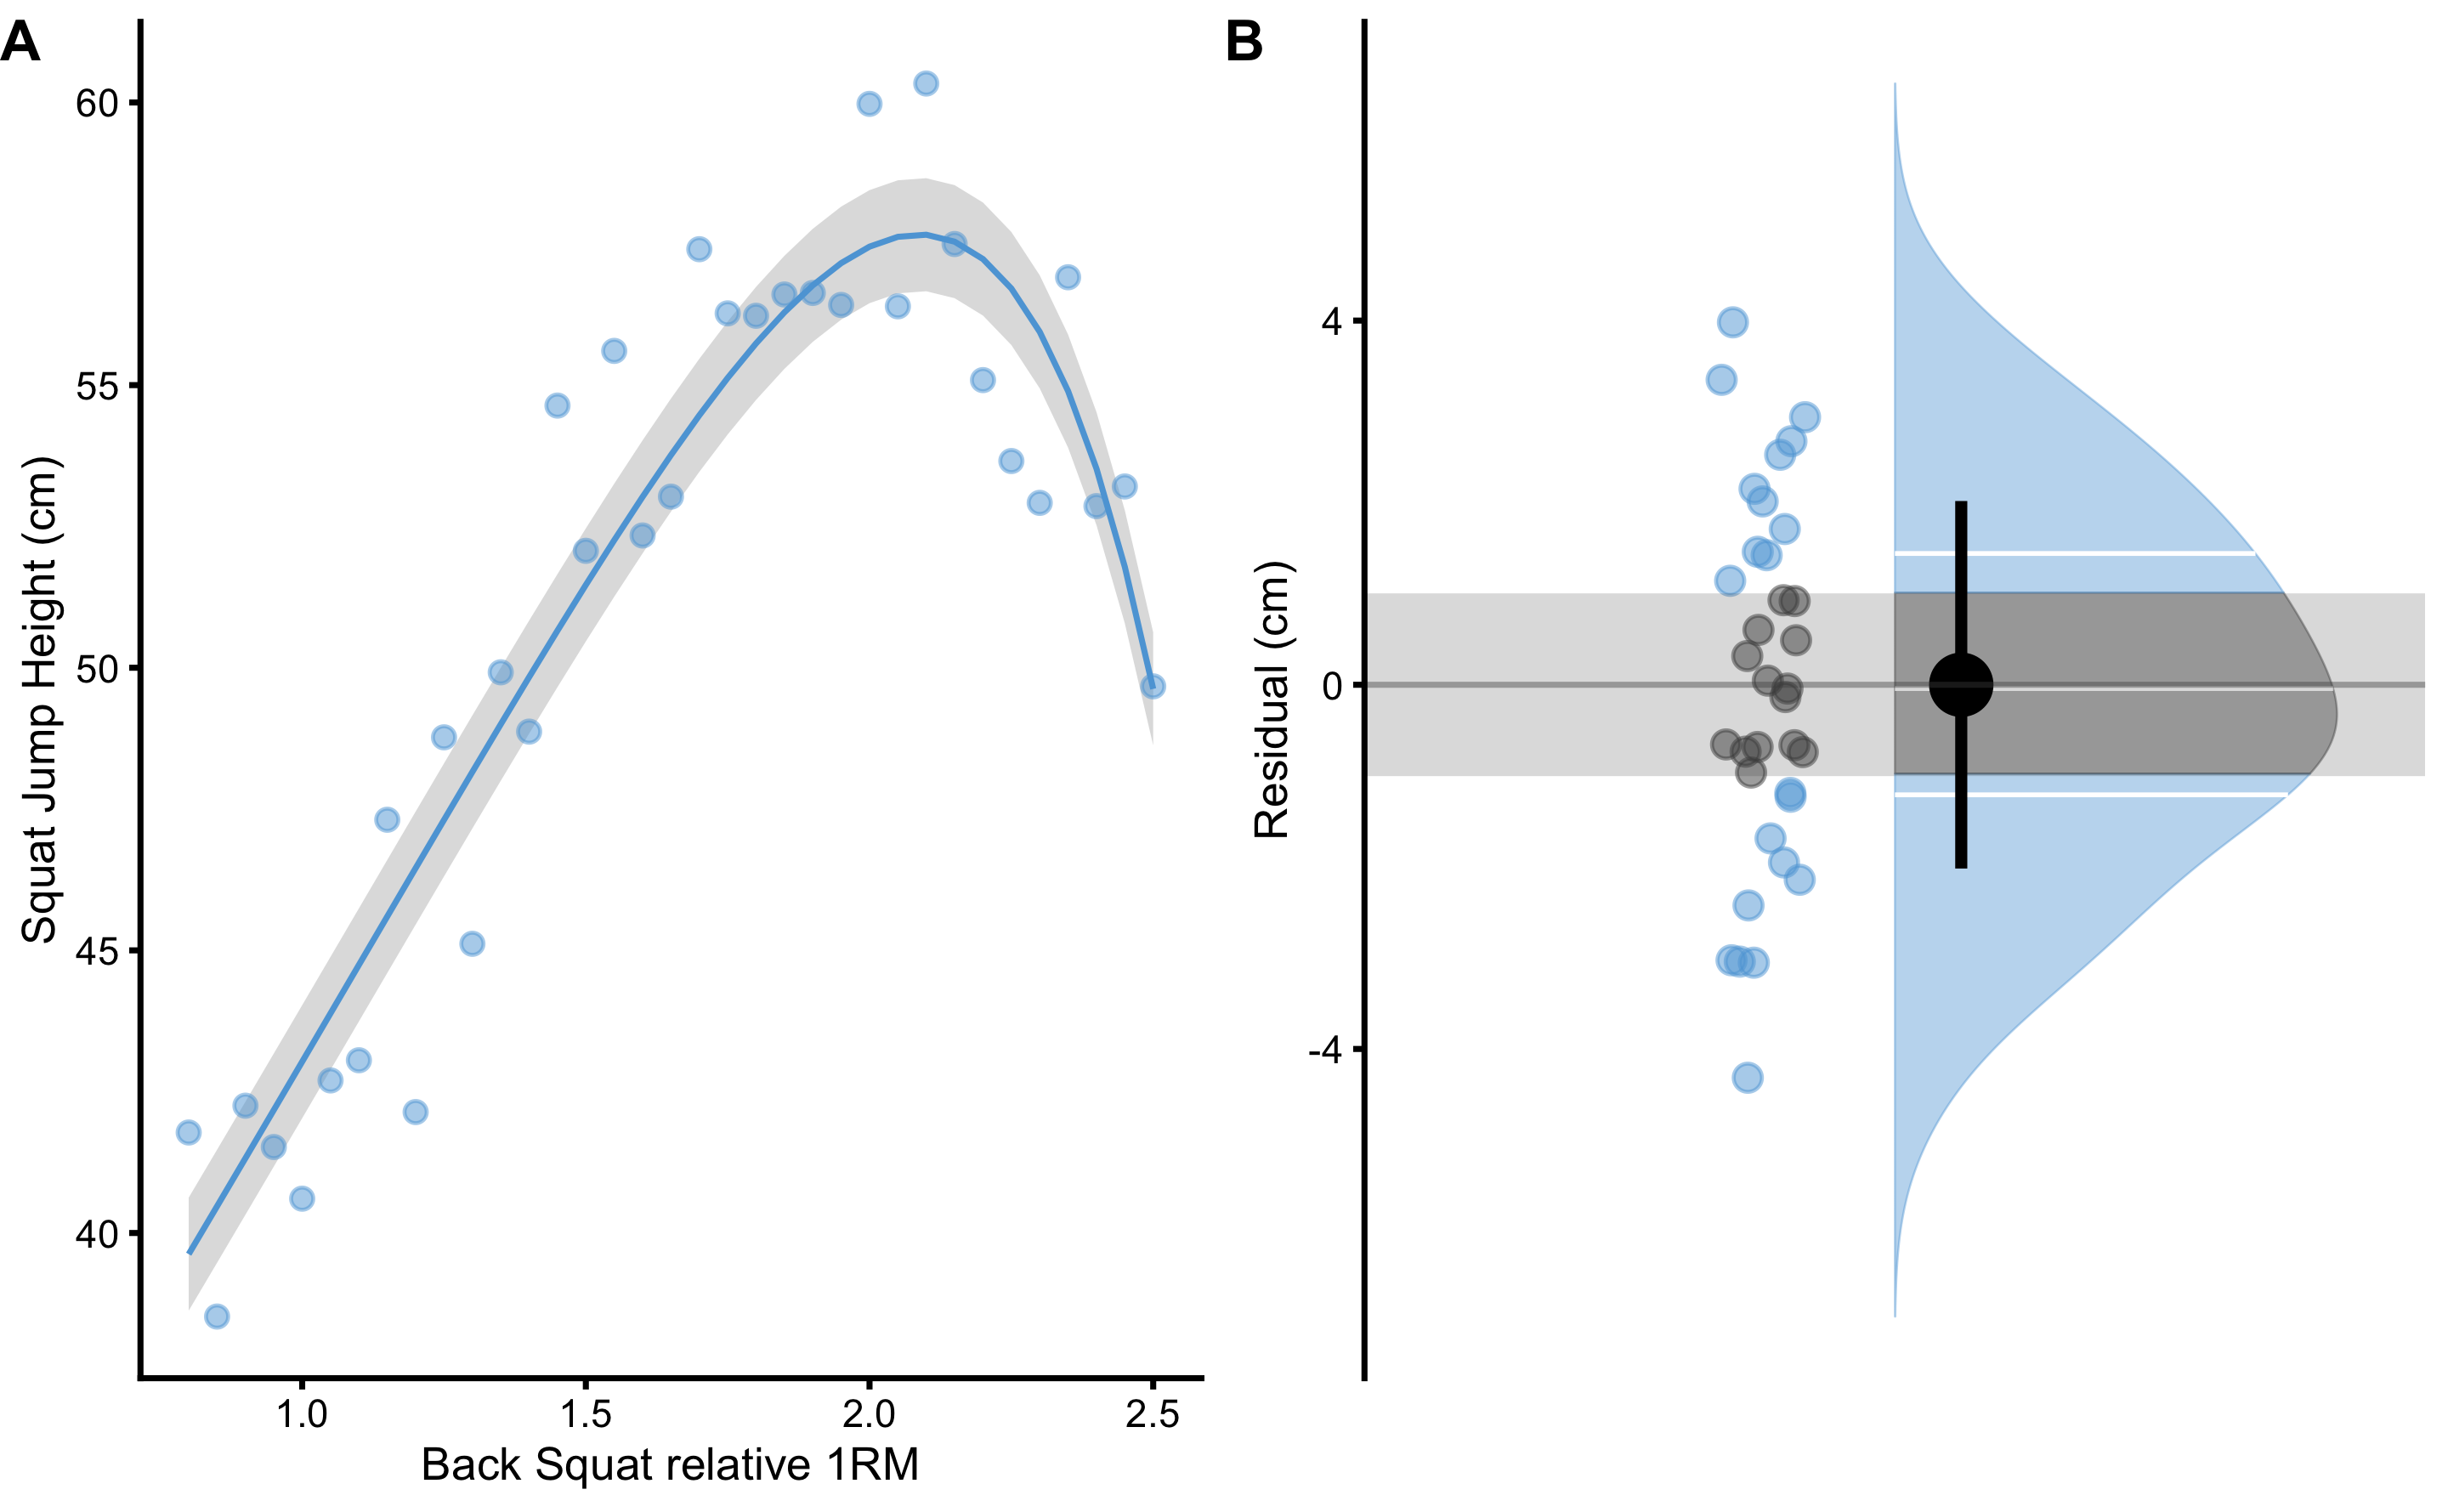 Model performance on the training data set. A. Model with the lowest cvRMSE is selected. SESOI is depicted as grey band around the model prediction (blue line). B. Residuals scatter plot. Residuals outside of the SESOI band (grey band) indicate prediction which error is practically significant. PPER represents proportion of residuals inside the SESOI band